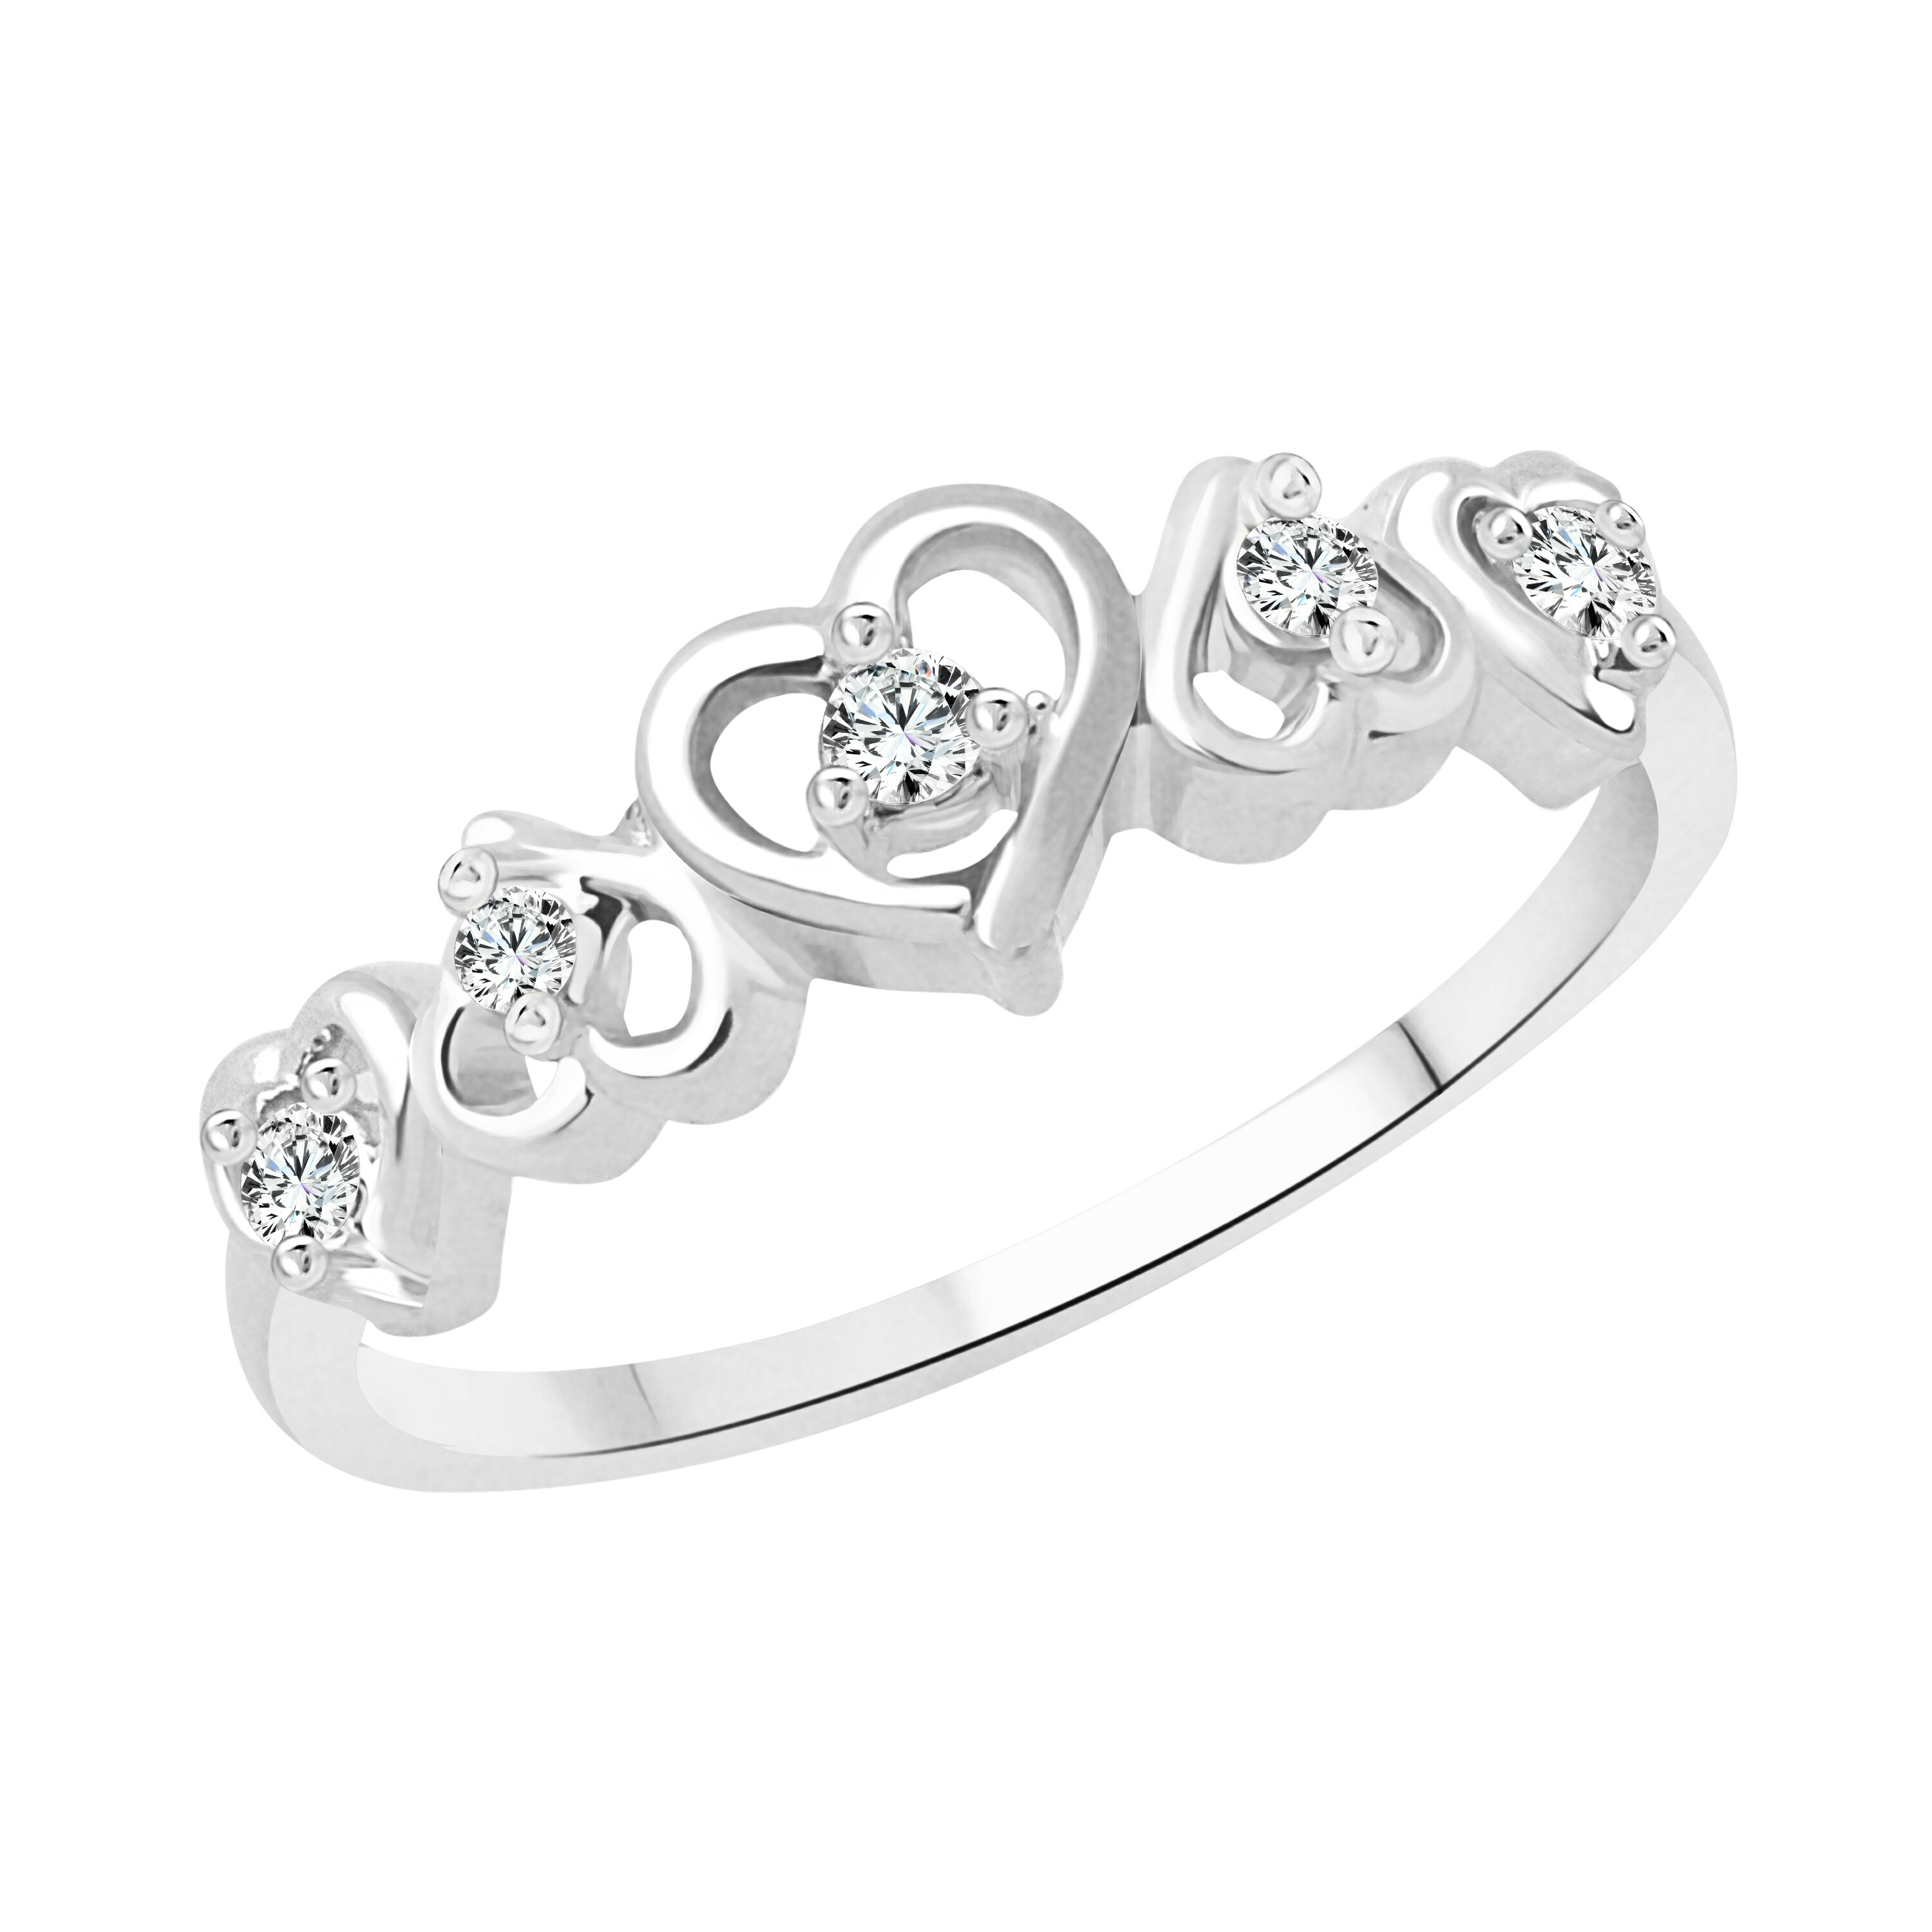 Vighnaharta Dancing Heart CZ Rhodium Plated Alloy Ring for Women and Girls